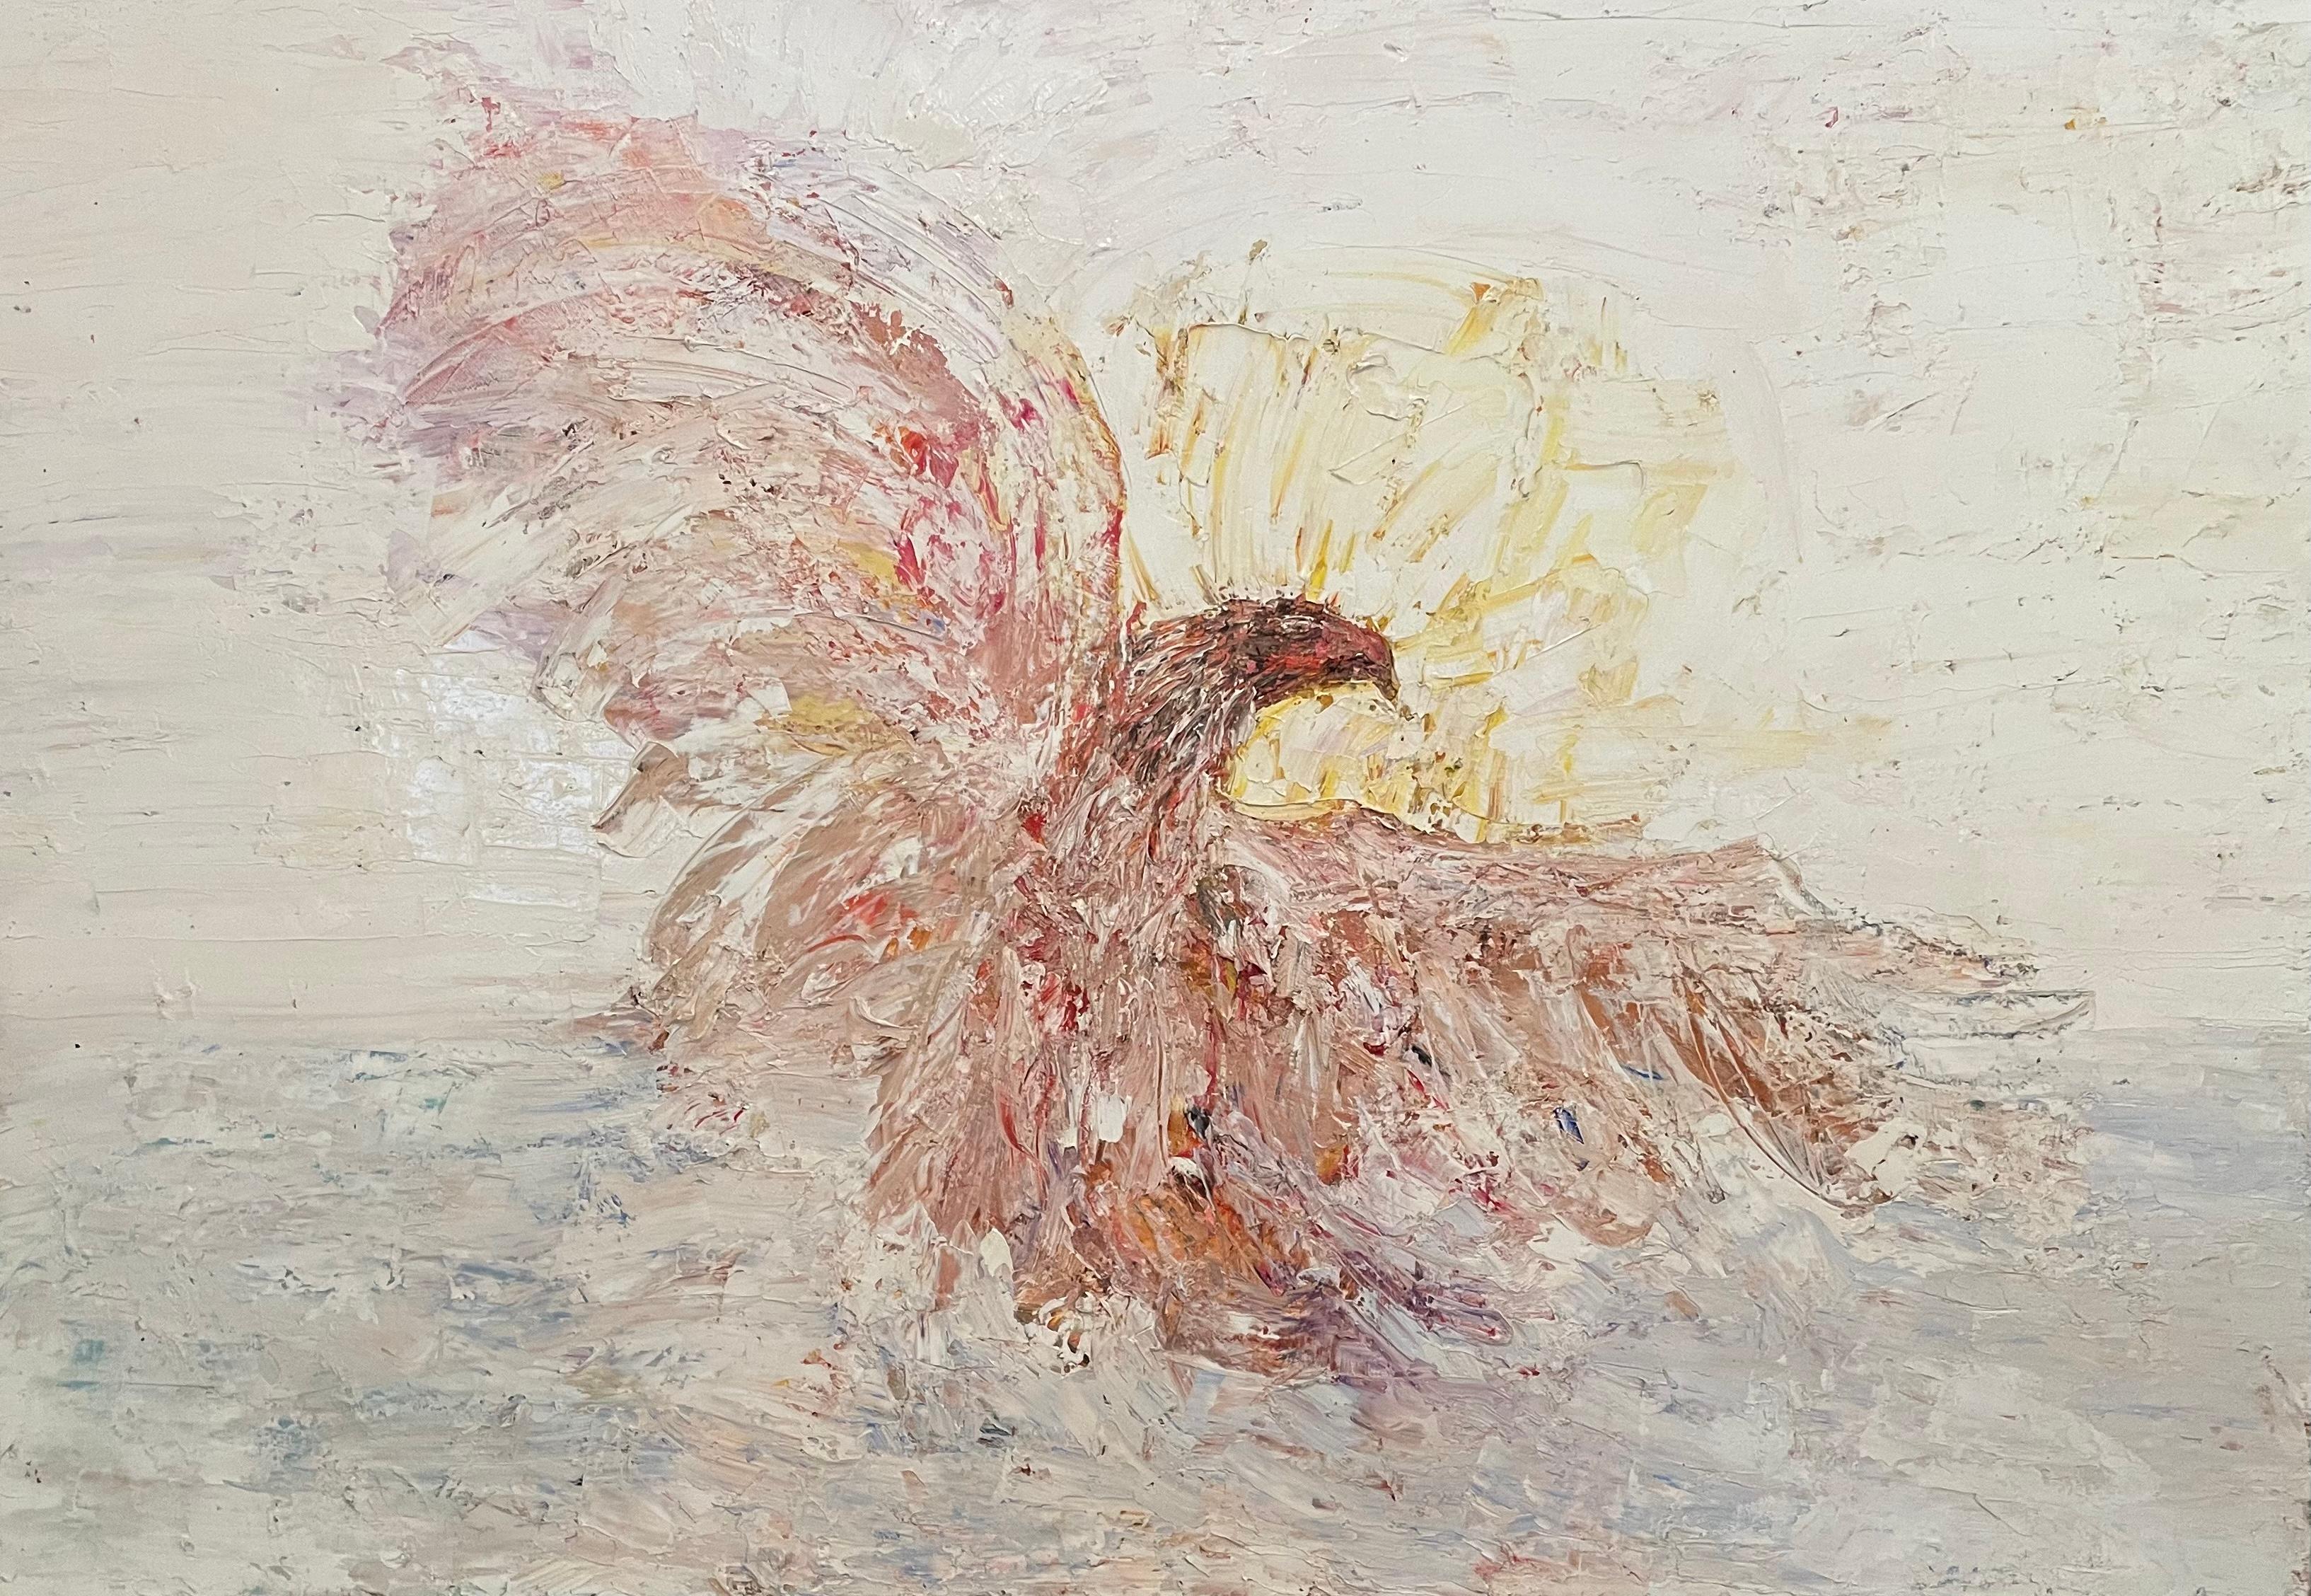 David Leviathan Animal Painting - 'The Eagle' - Orange and White Large Bird - Abstract Expressionist Oil Painting